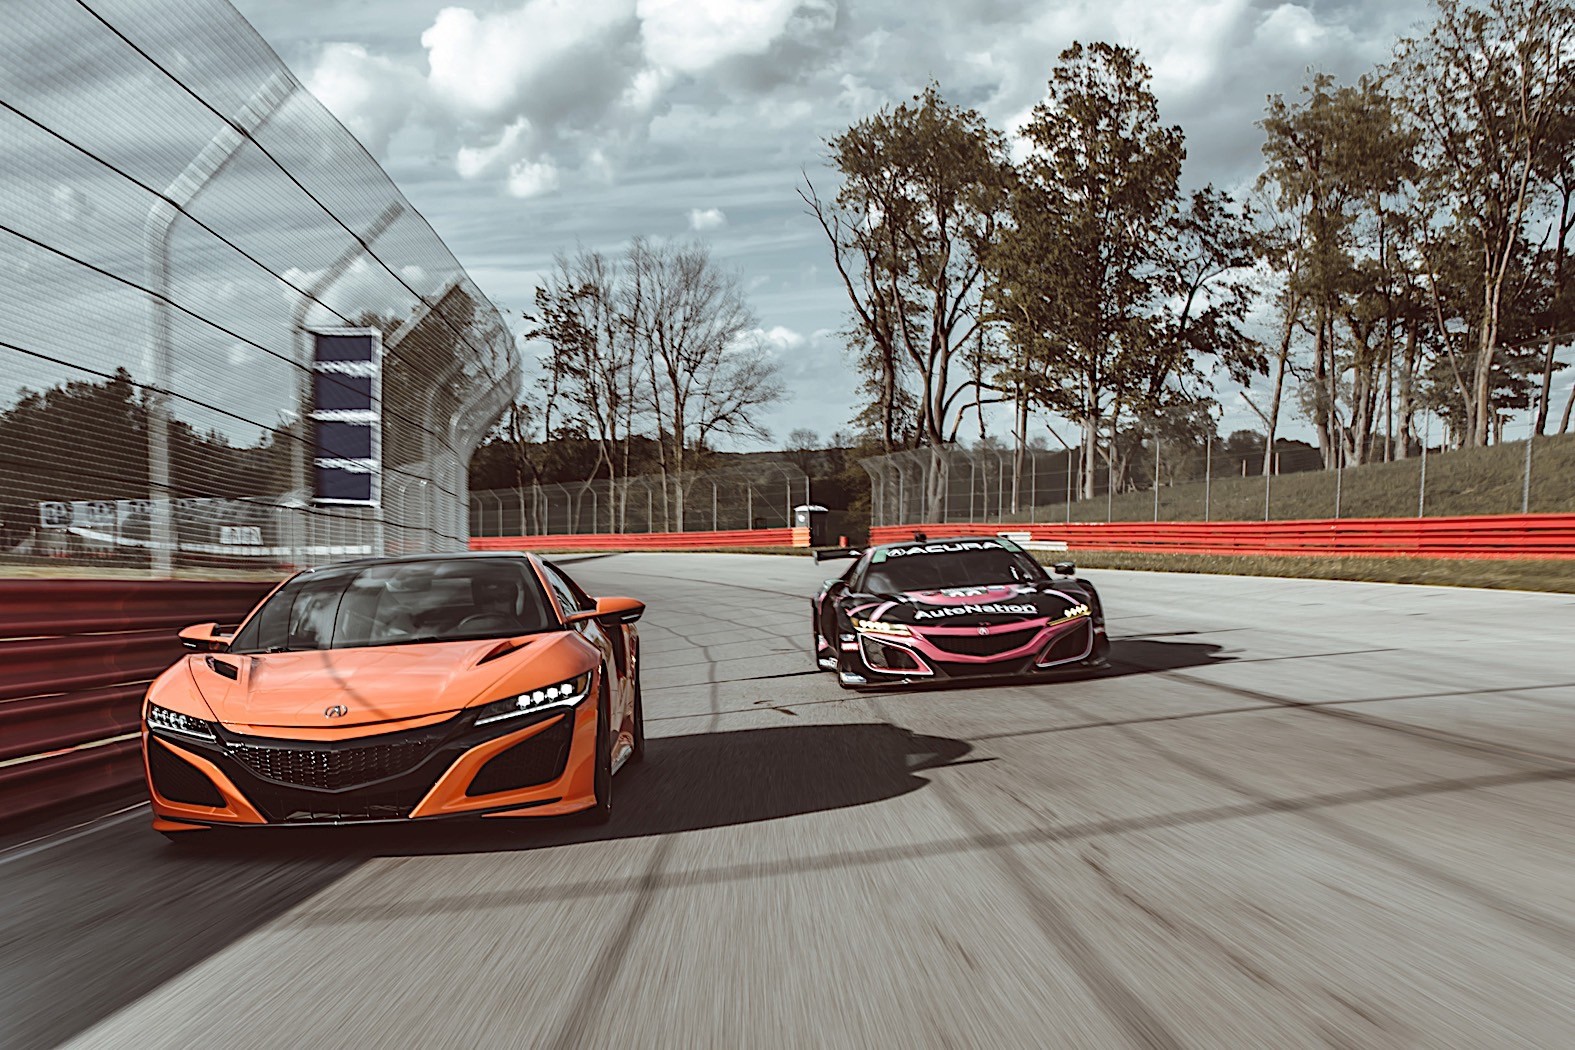 Acura NSX Road Car Challenges NSX GT3 Evo Racer to Track Showdown